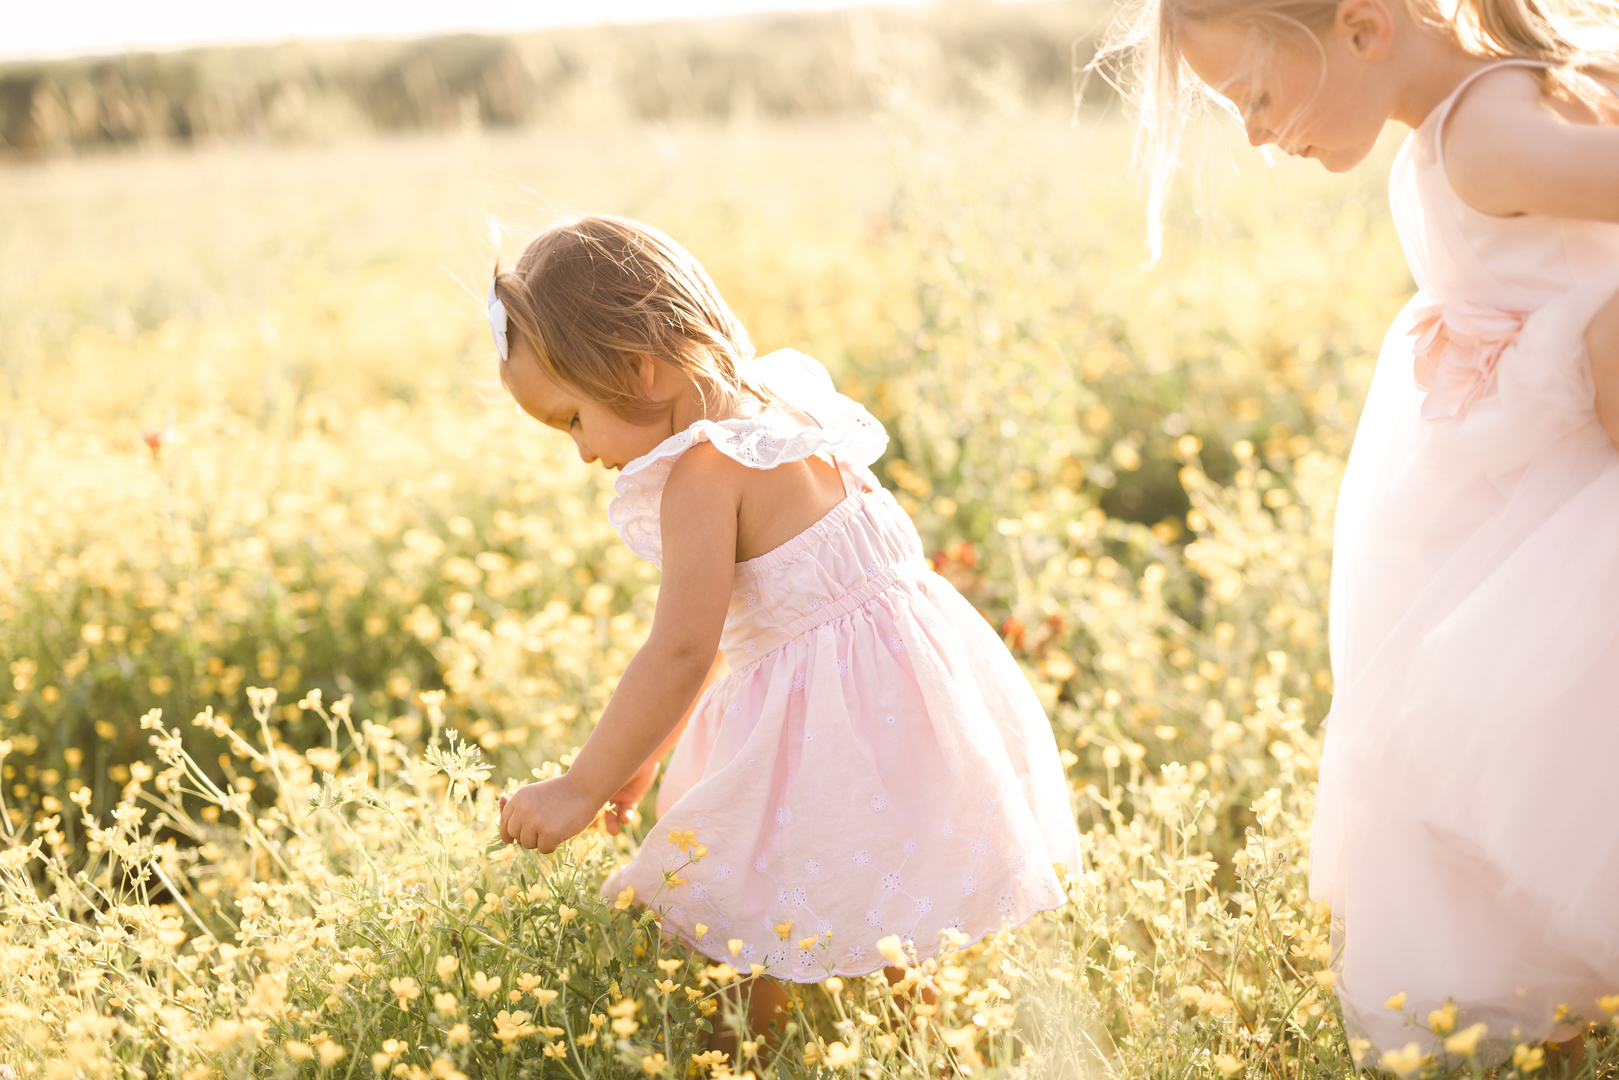 flower girl and young girl in a flower field during a wedding day